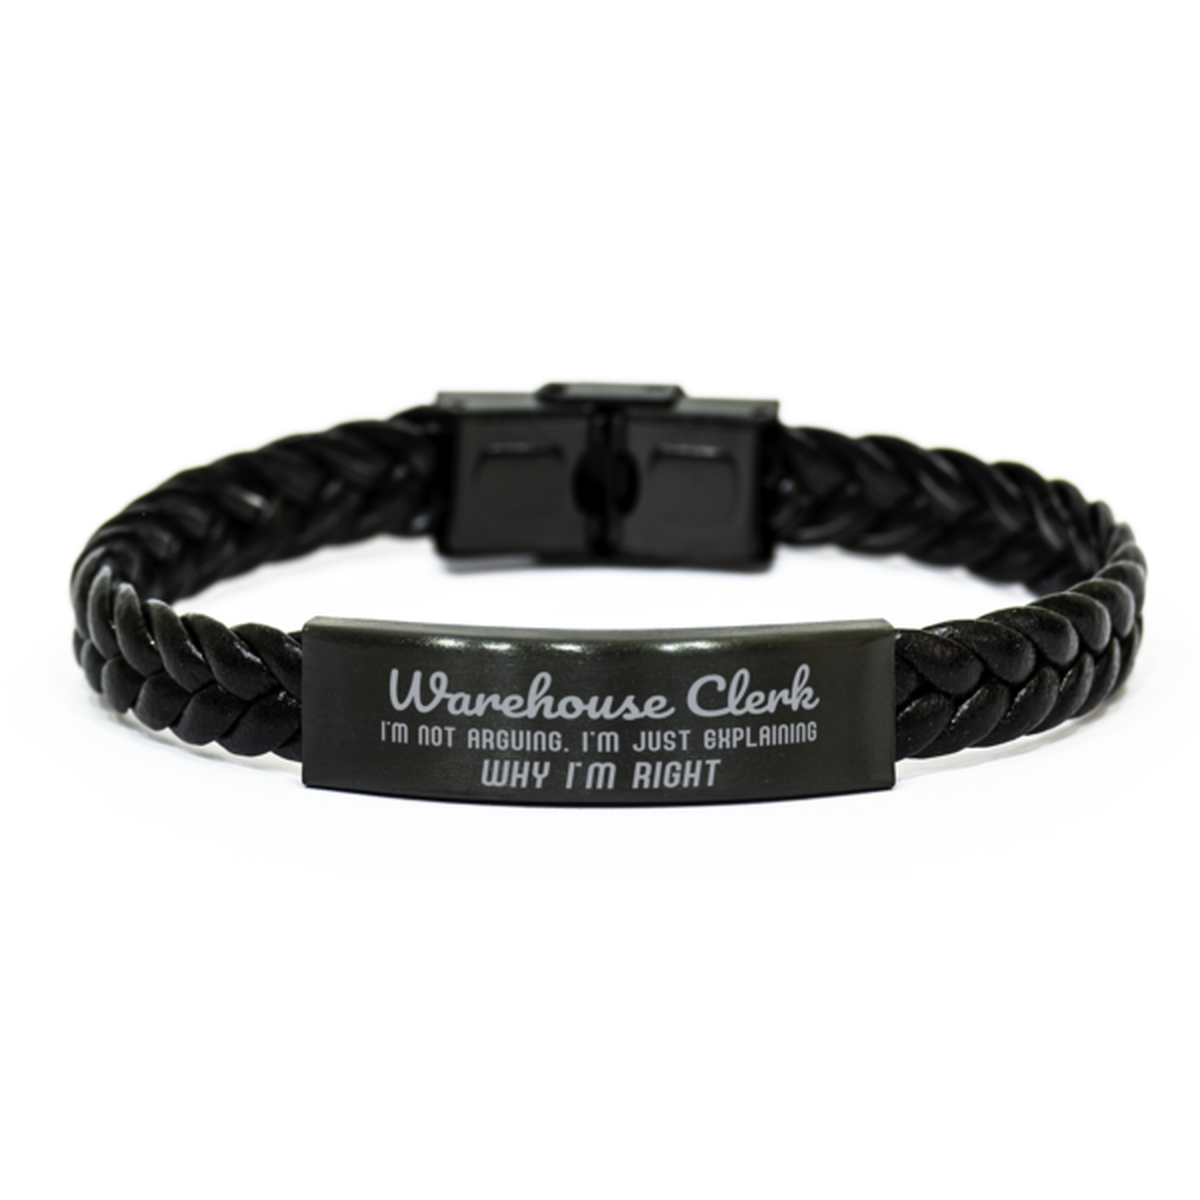 Warehouse Clerk I'm not Arguing. I'm Just Explaining Why I'm RIGHT Braided Leather Bracelet, Graduation Birthday Christmas Warehouse Clerk Gifts For Warehouse Clerk Funny Saying Quote Present for Men Women Coworker